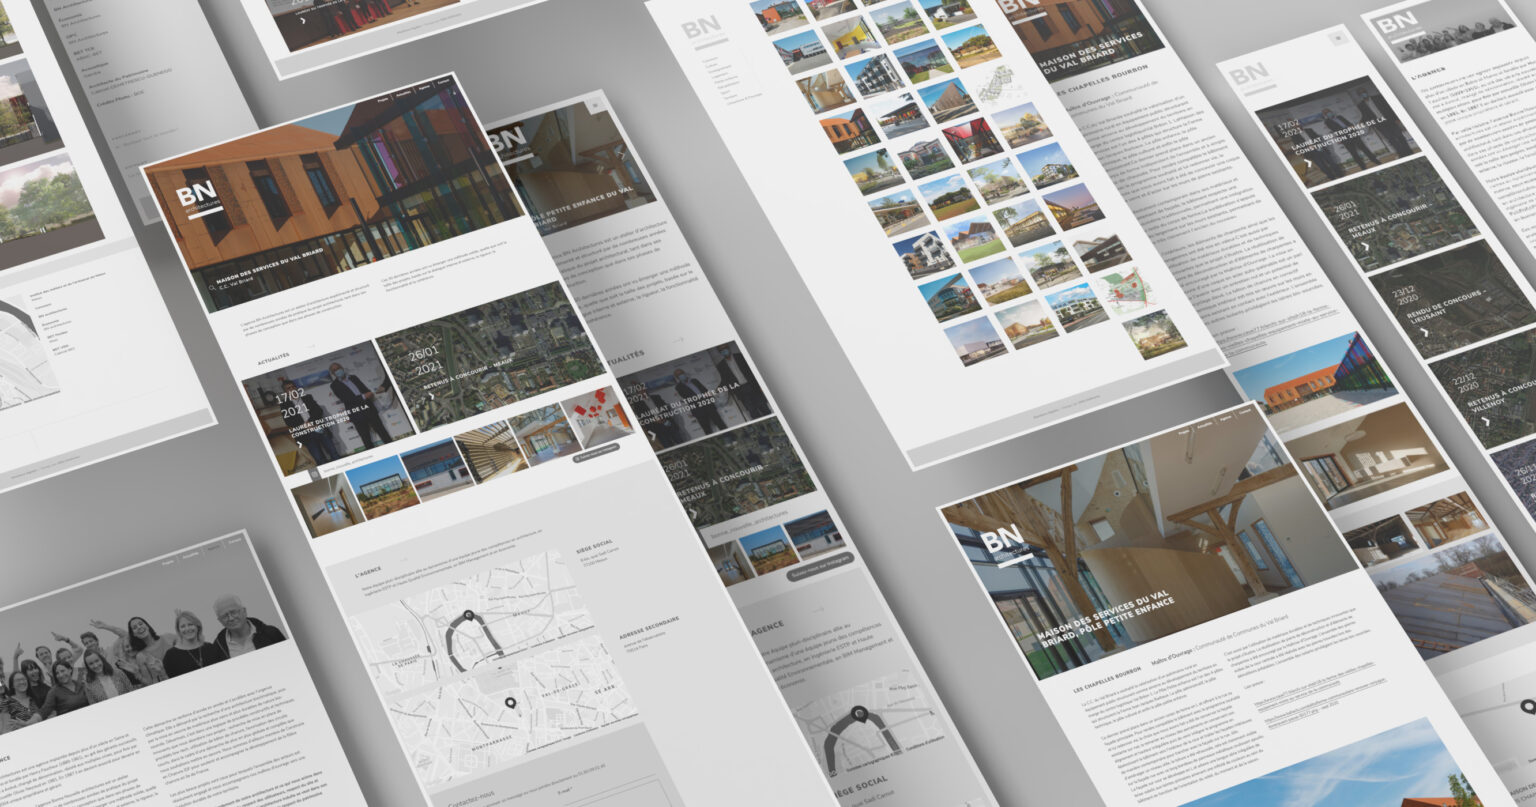 Bn architectures pages web mockups